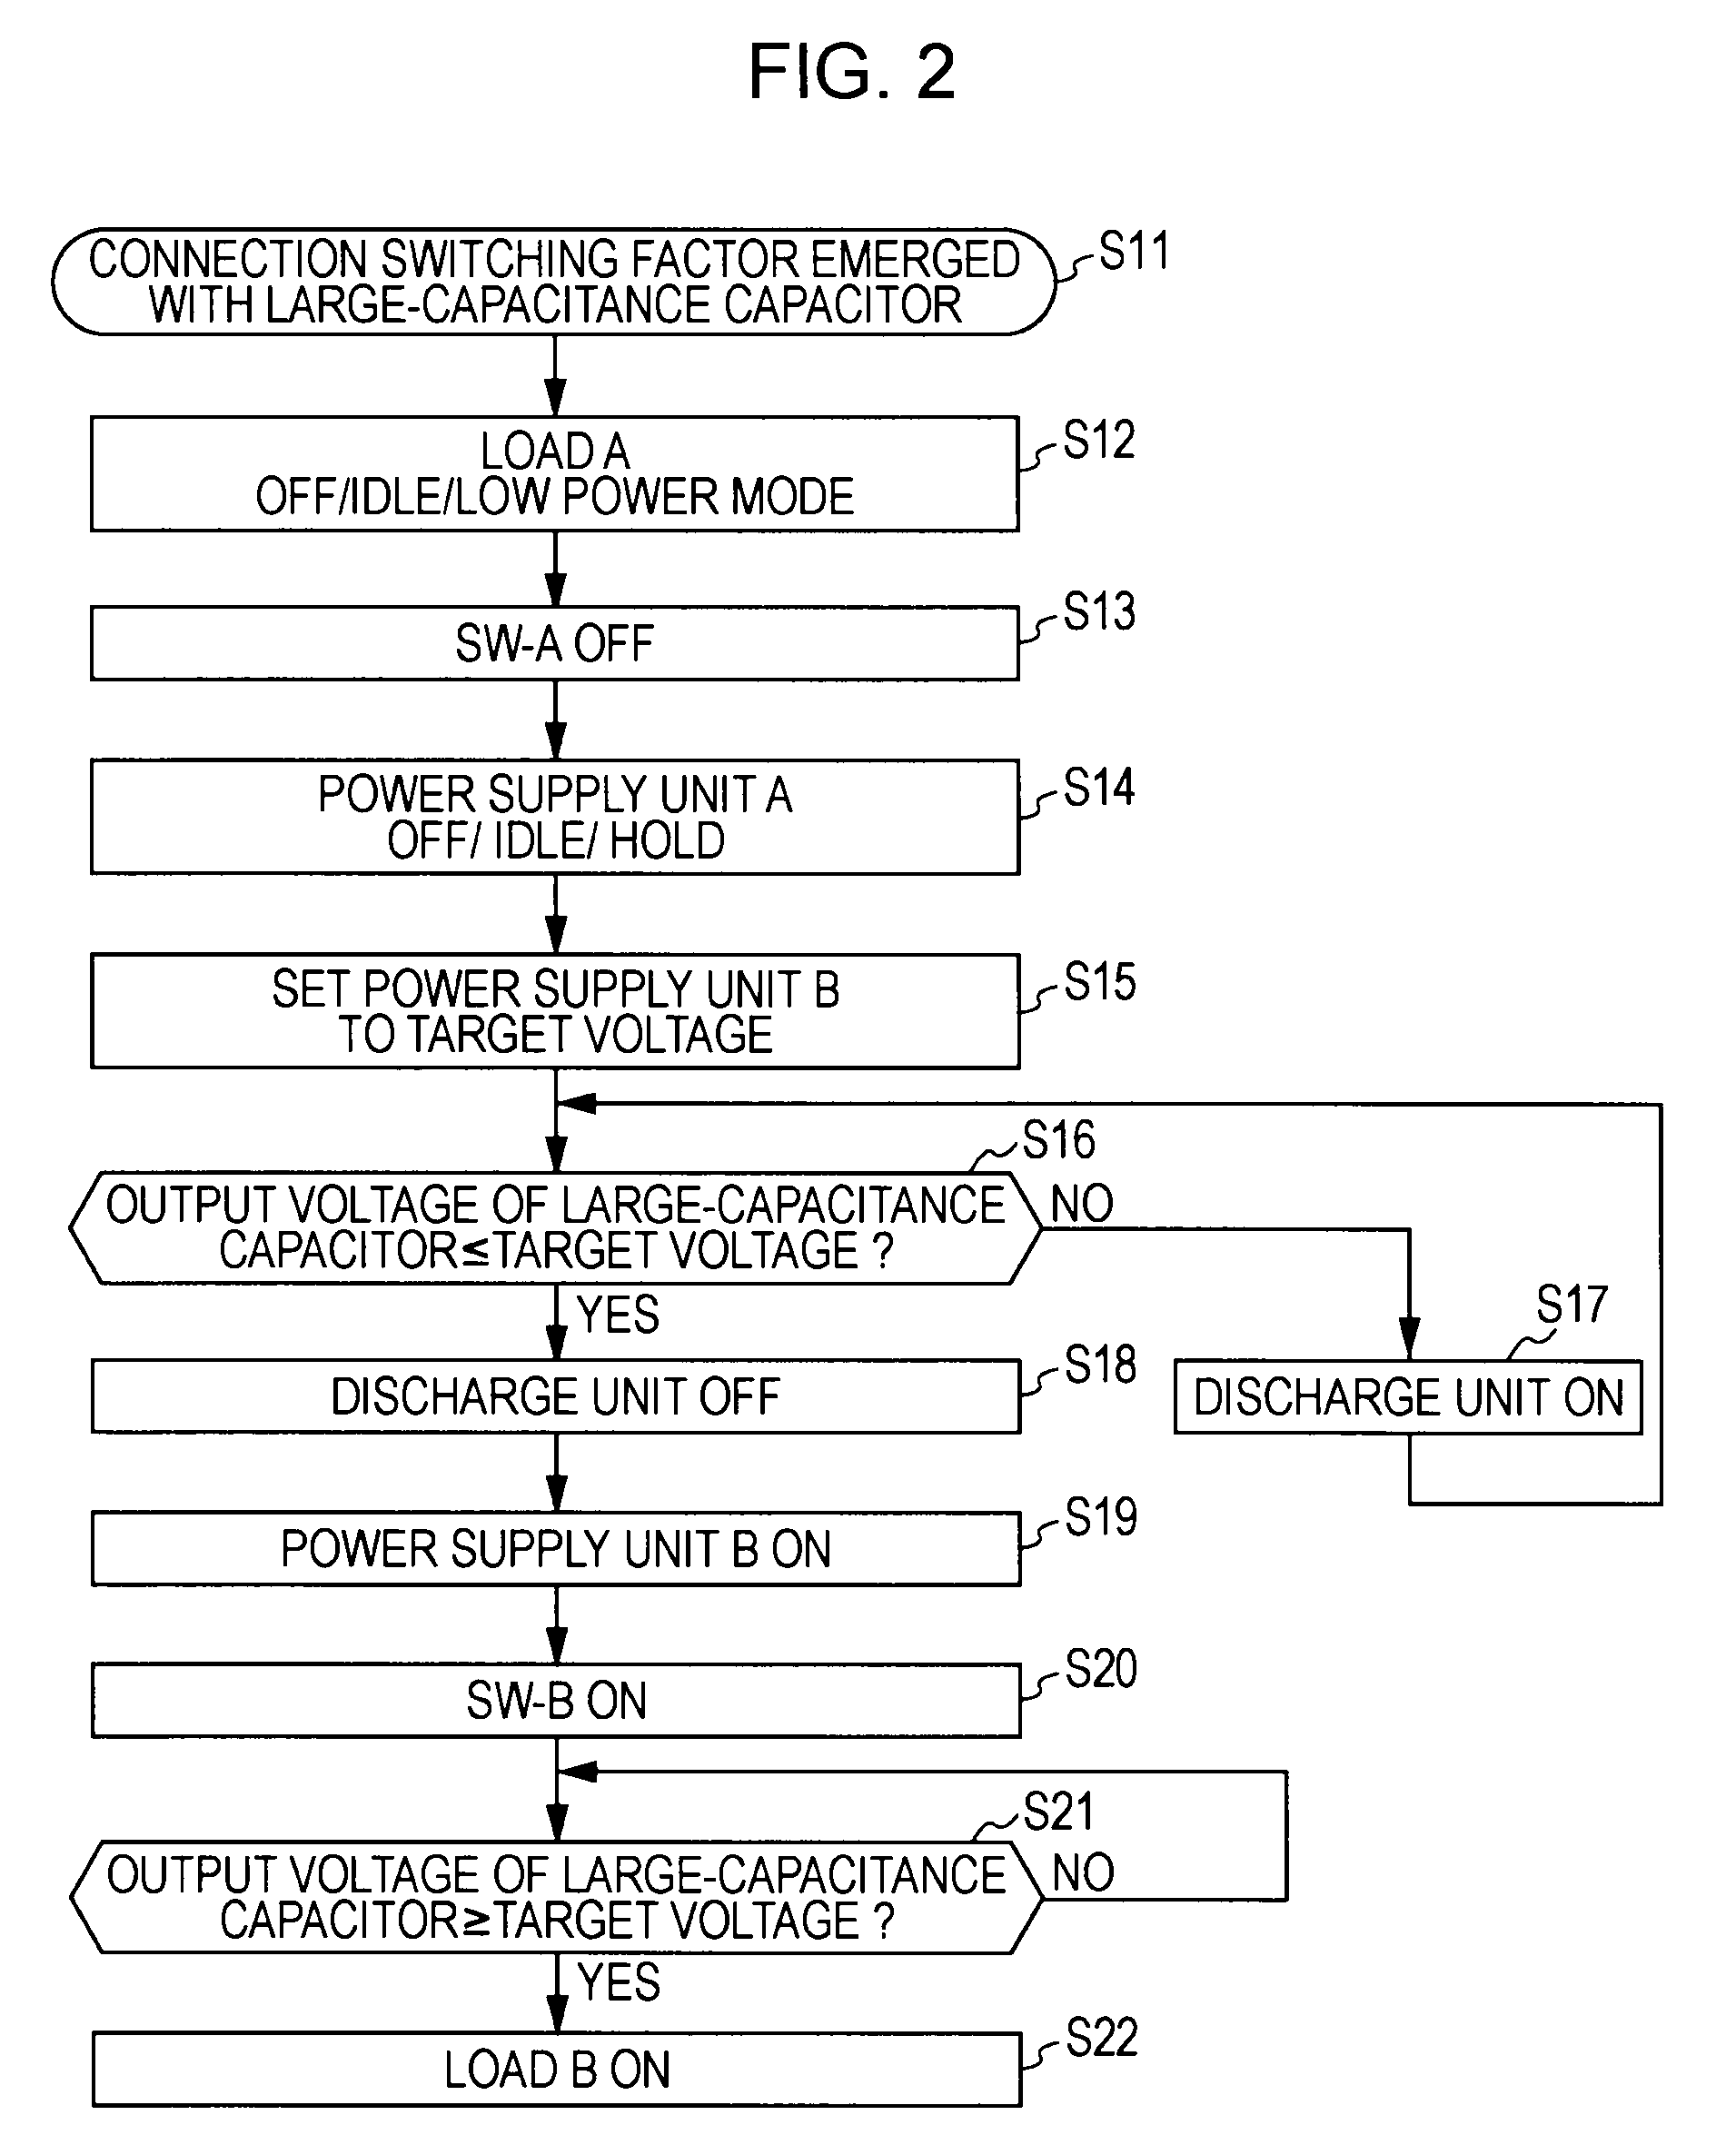 Power supply system and electronic instrument